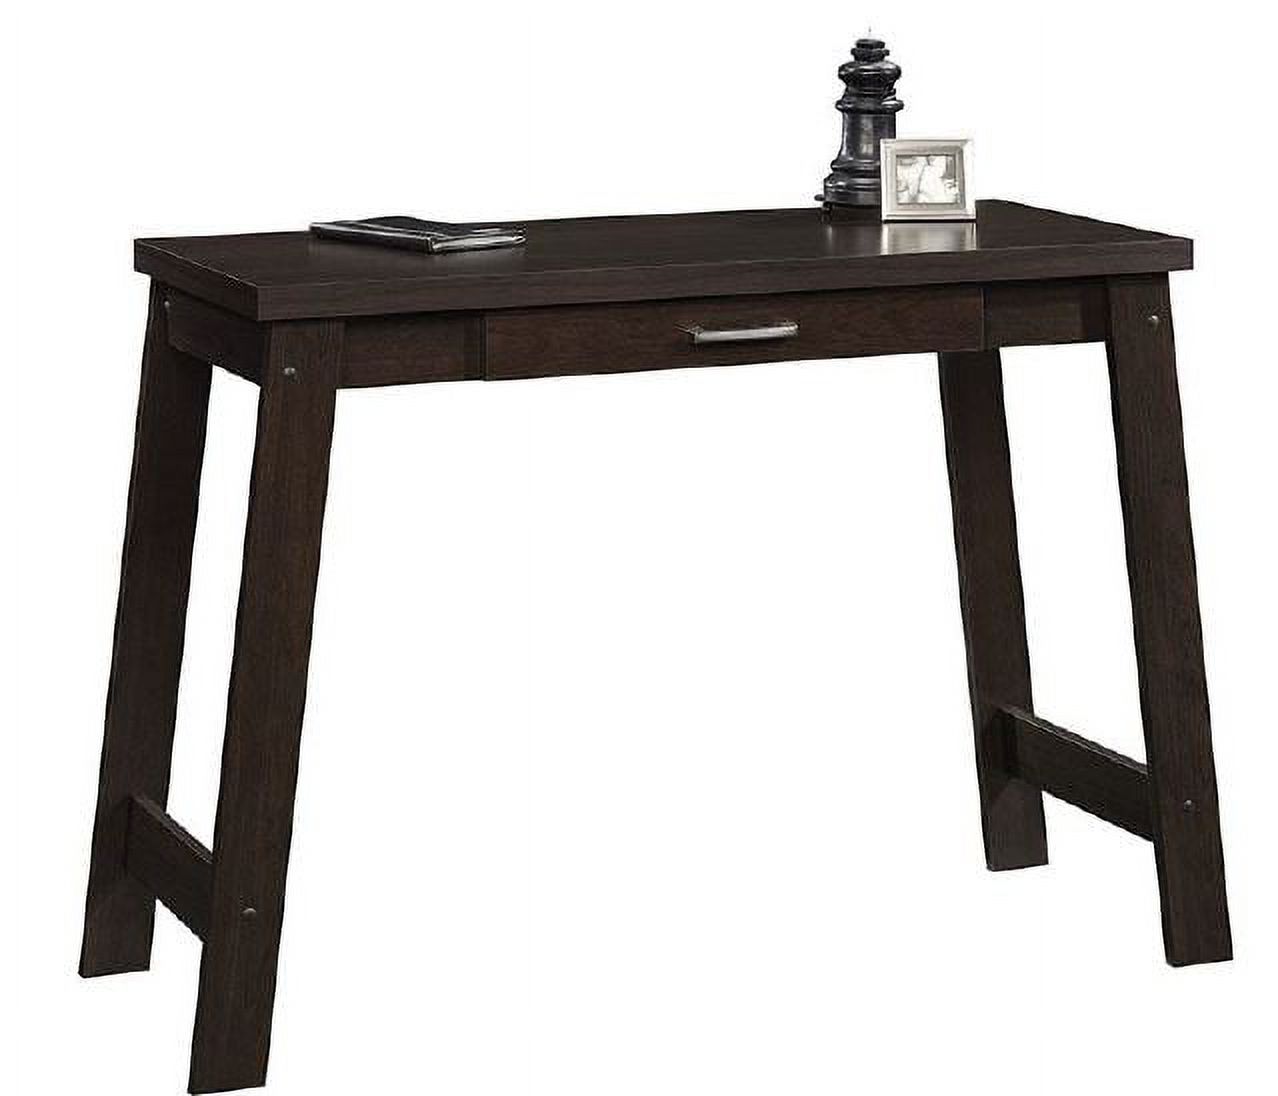 Mainstays Logan Writing Desk with Pullout Drawer - image 2 of 4